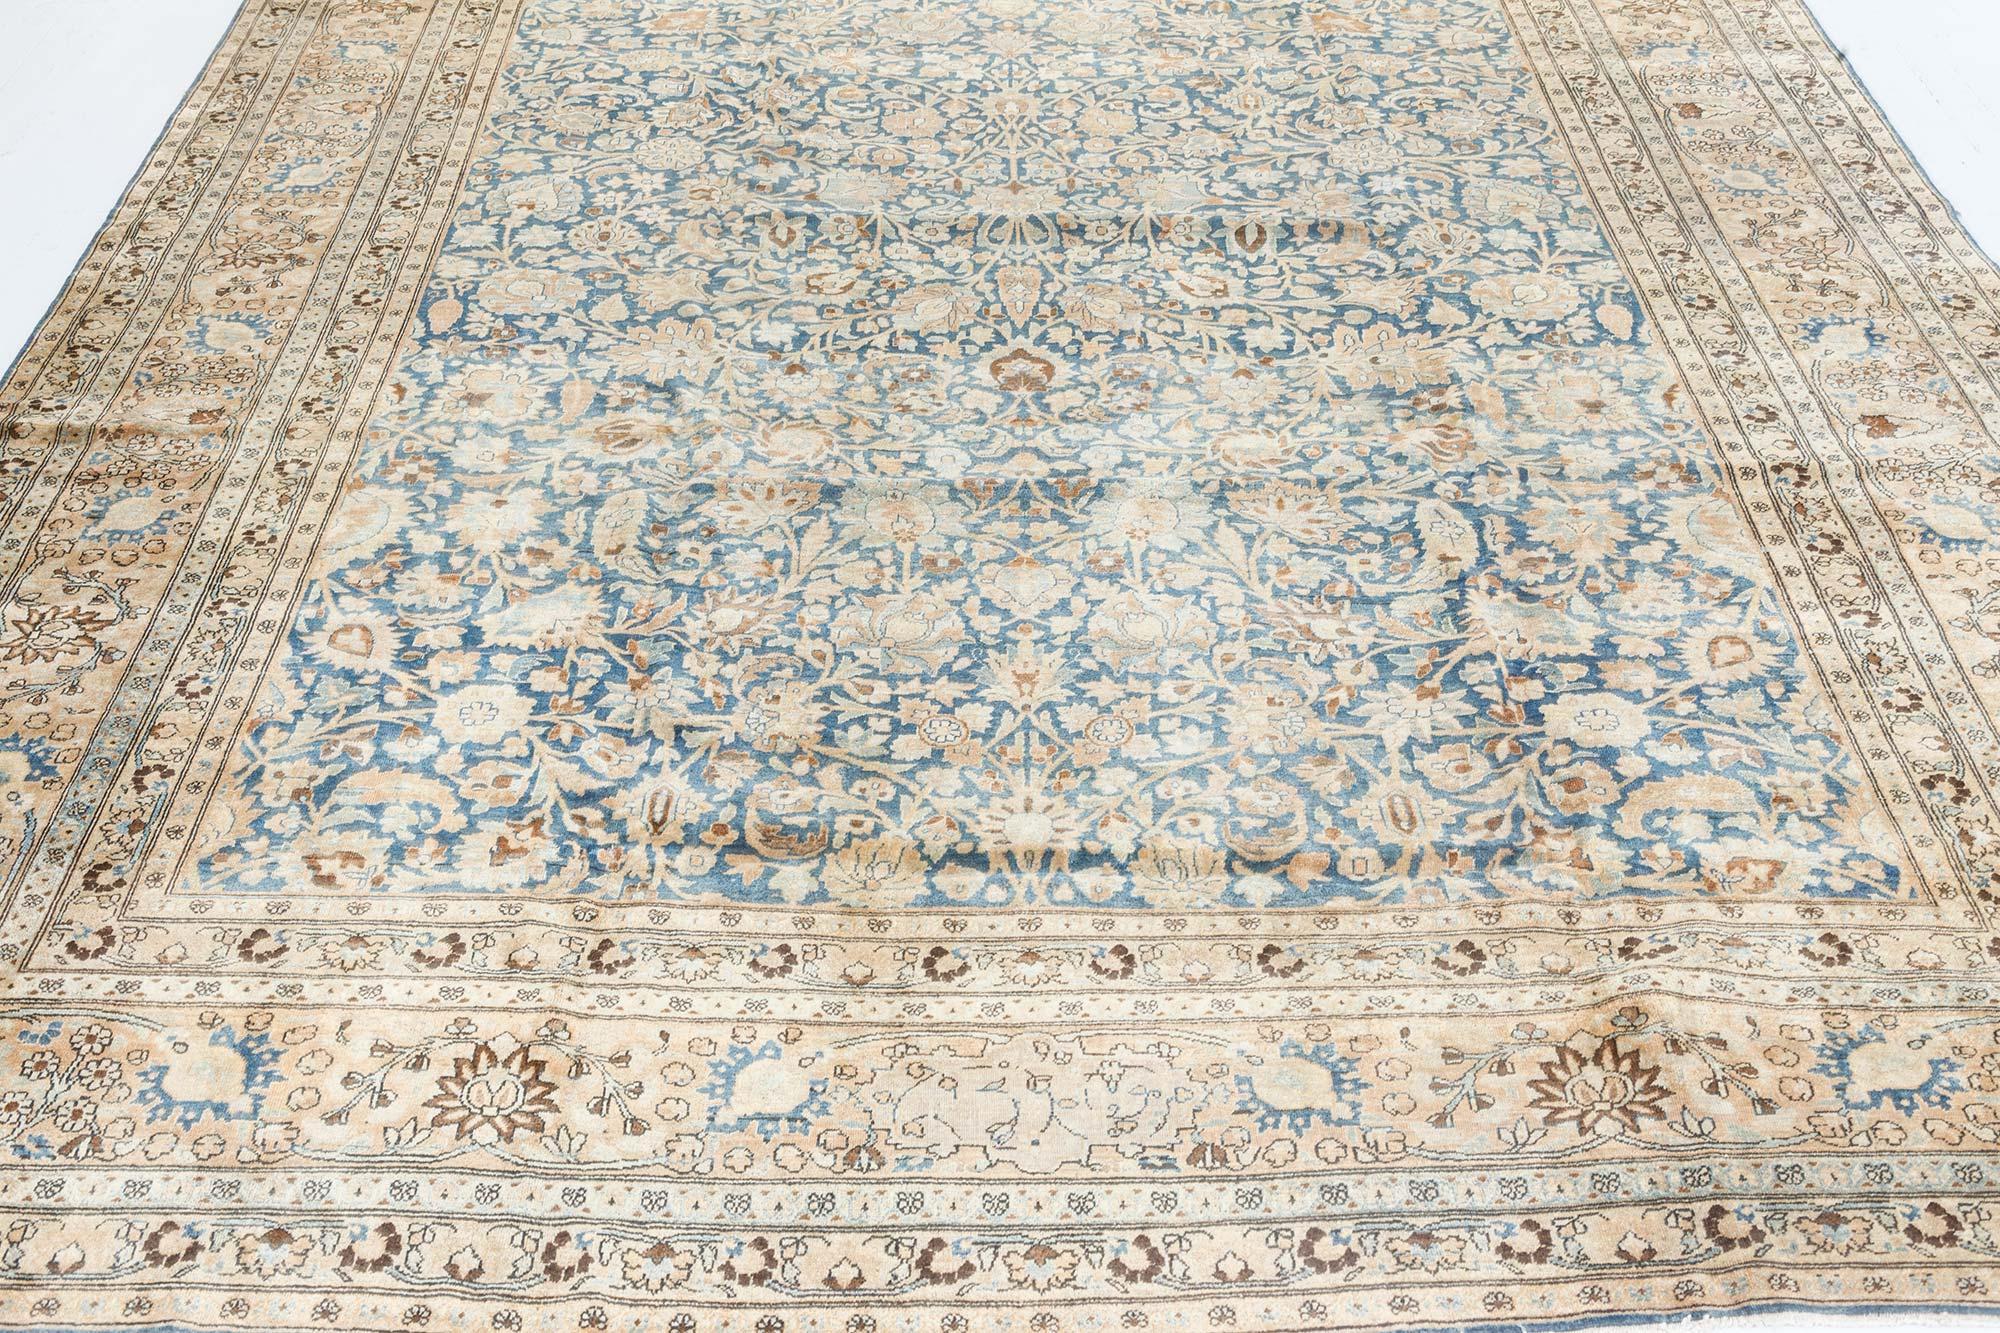 19th Century Persian Tabriz Handmade Wool Carpet In Good Condition For Sale In New York, NY